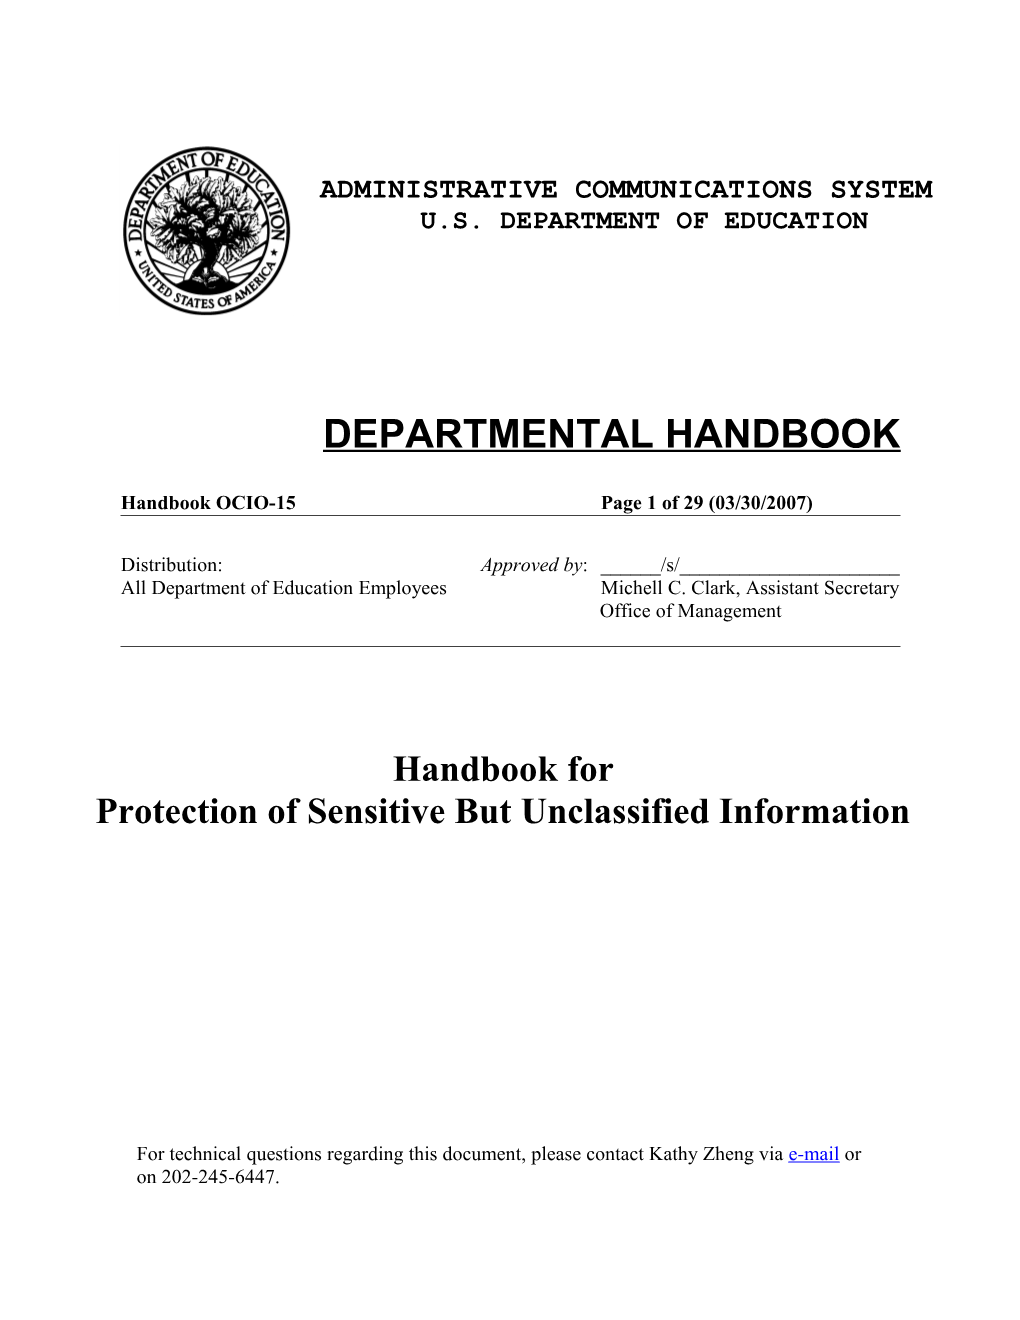 Handbook for Information Technology Security Certification and Accreditation Procedures